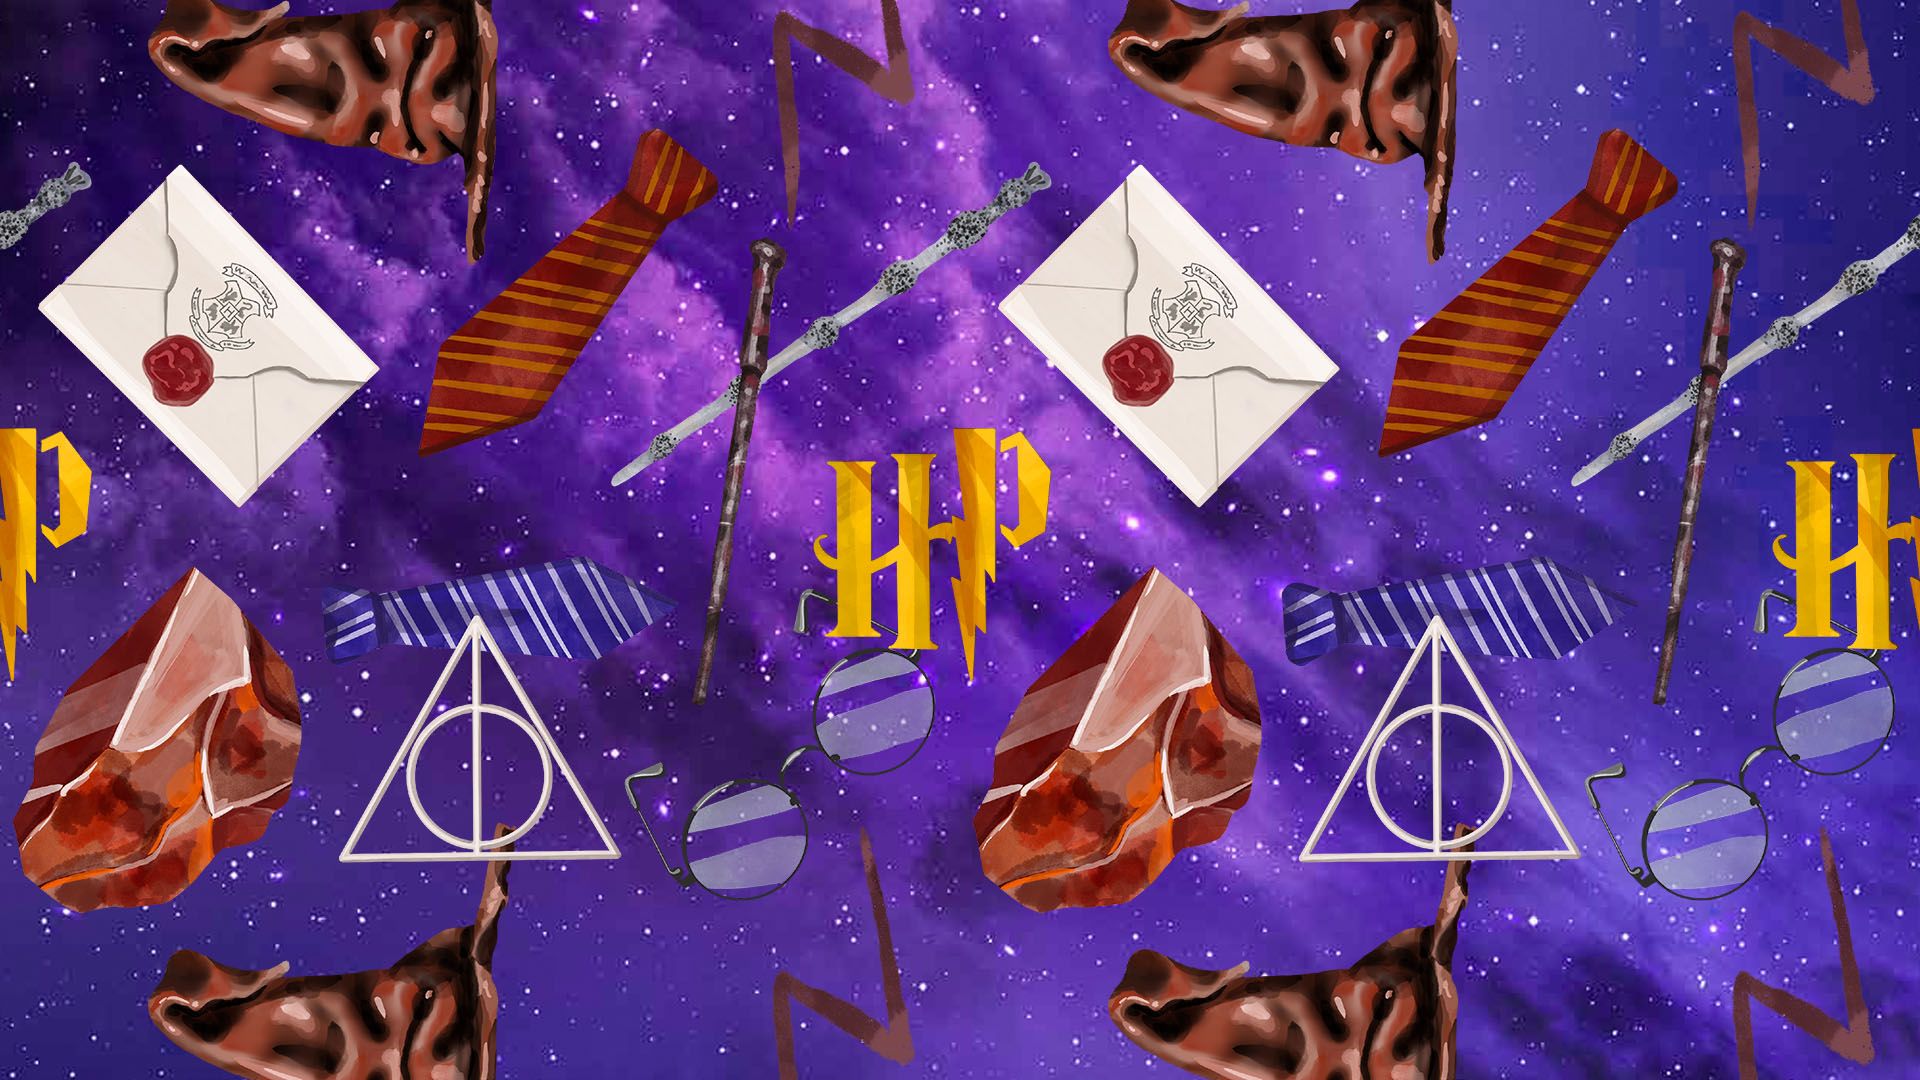 Wands and Wisdom: Exploring the Sacred Themes of J.K. Rowling's Wizarding World